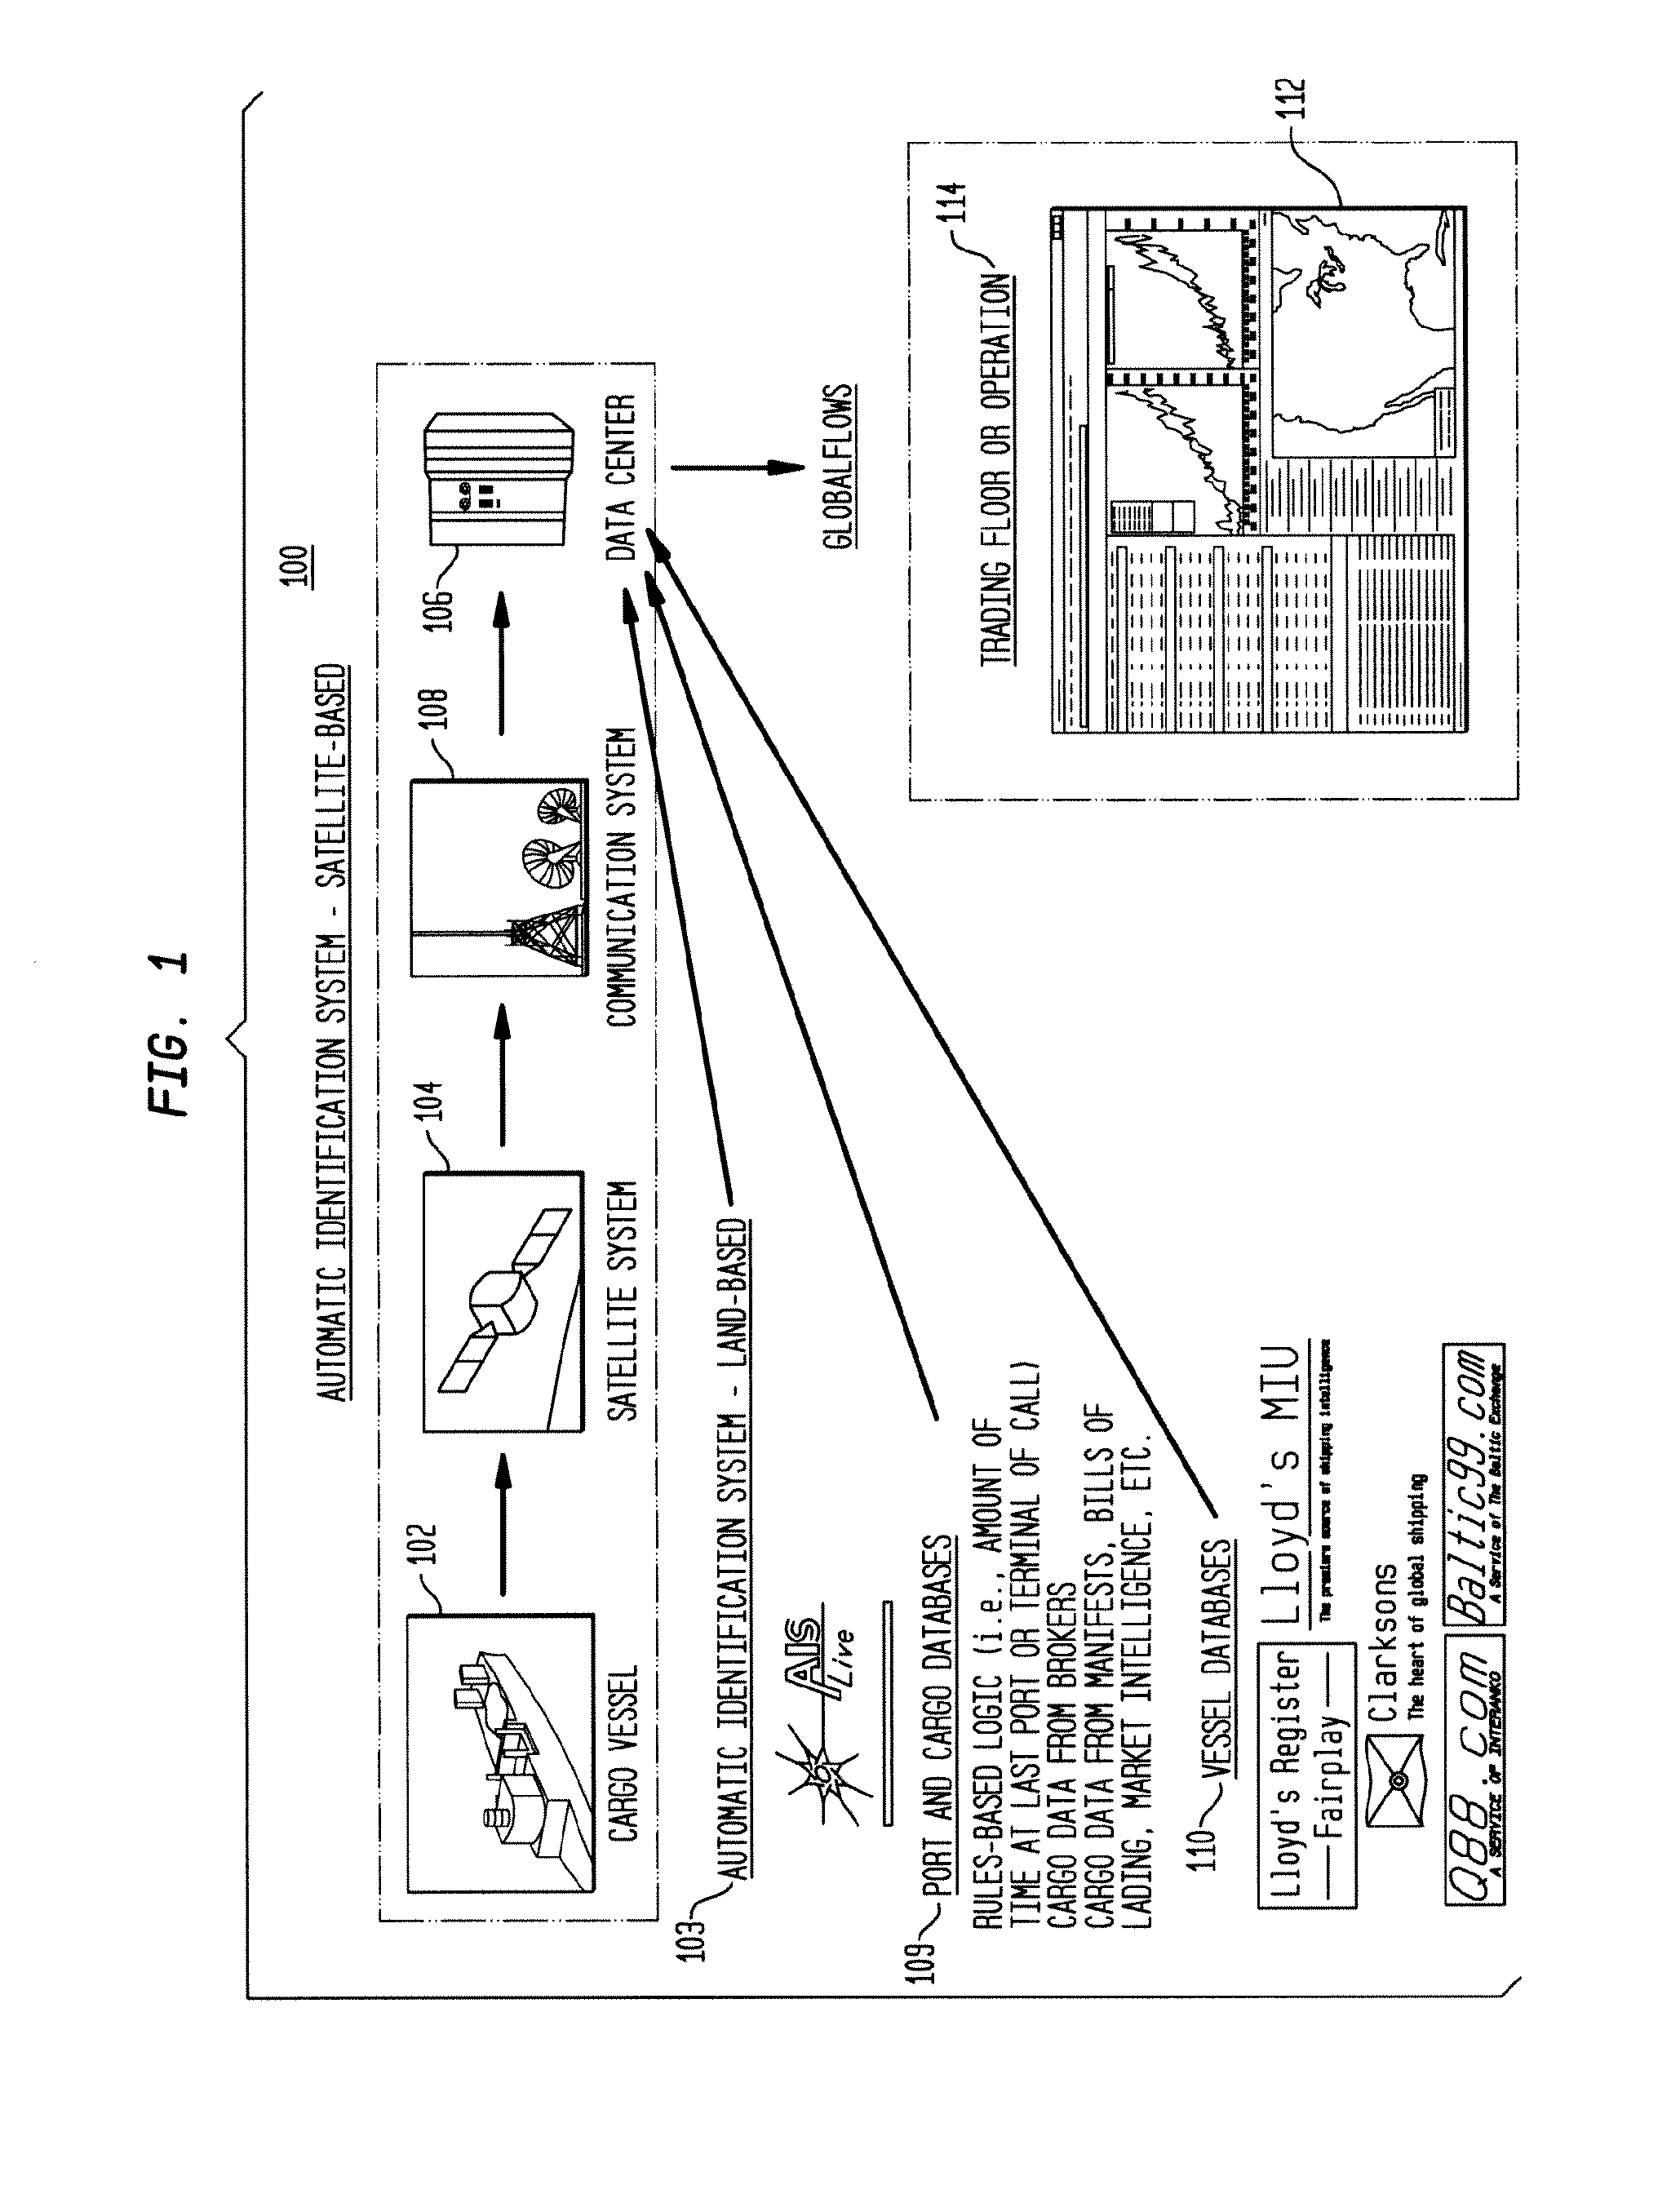 System and method for generating commodity flow information